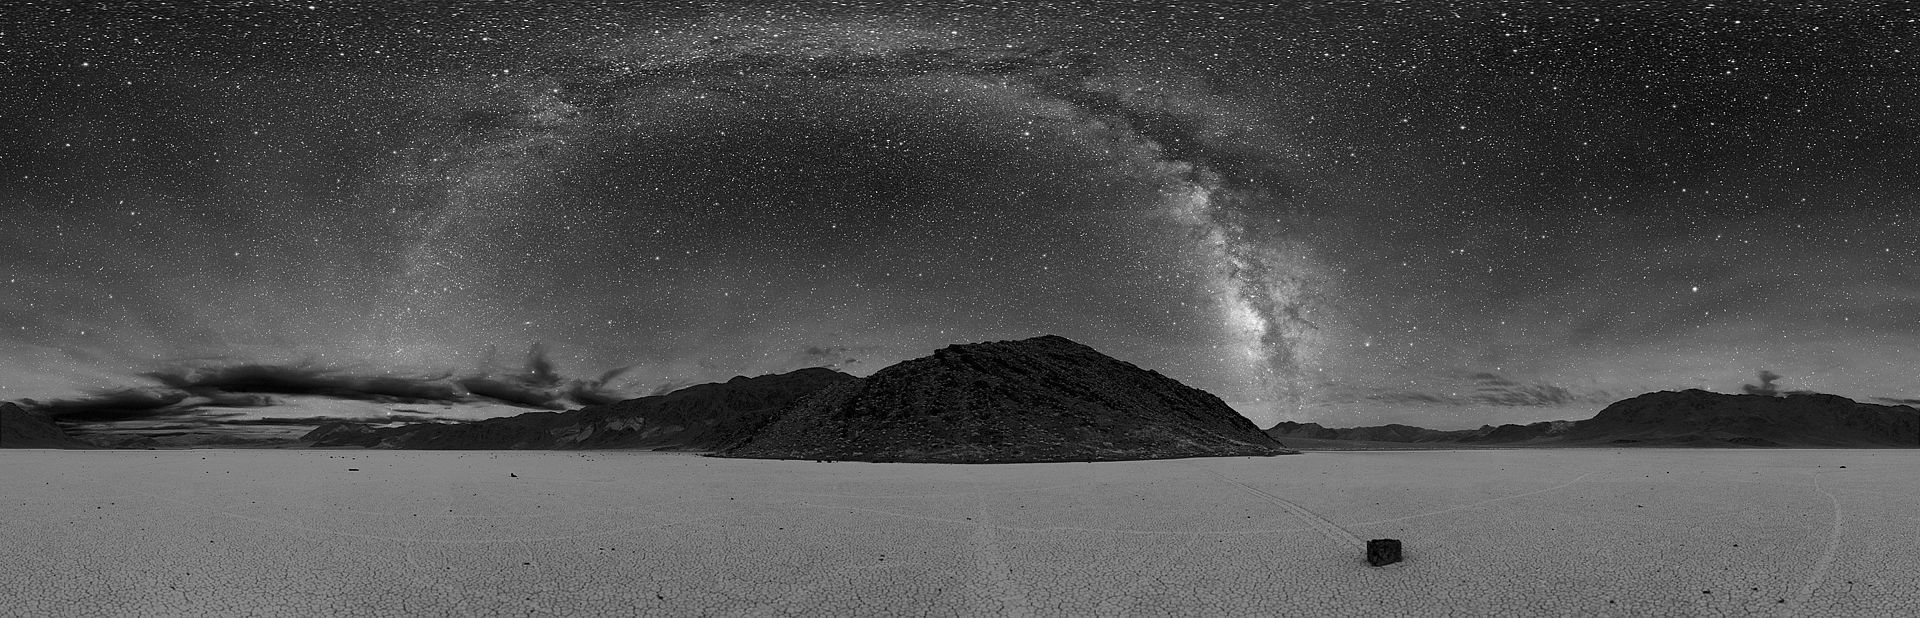 Sailing Stones in Death Valley